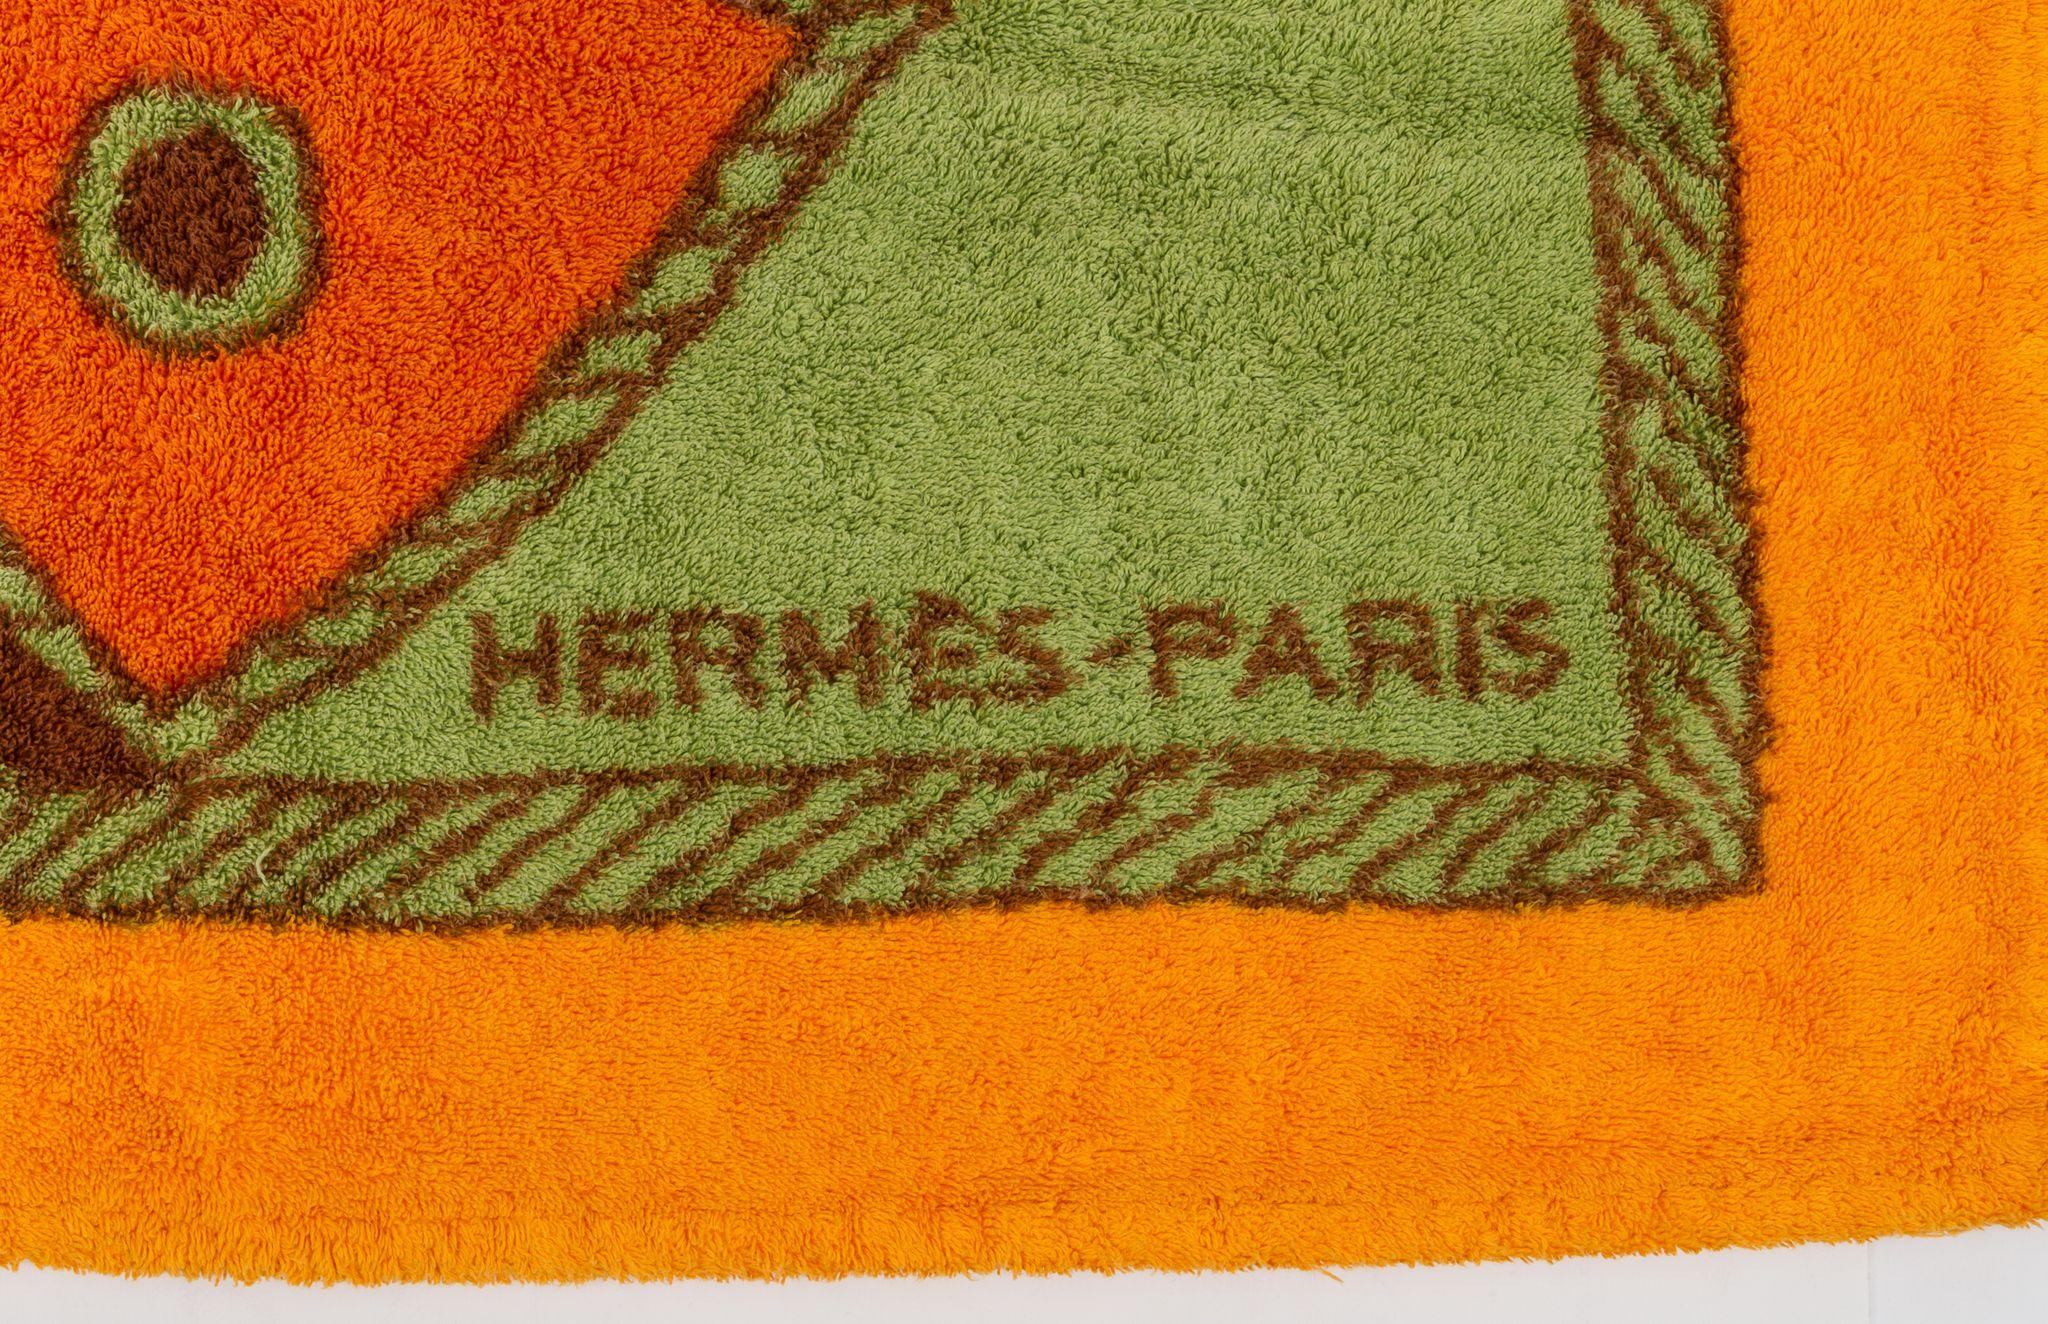 Hermès beach towel with fish design. Orange and green color combination. 100% cotton.